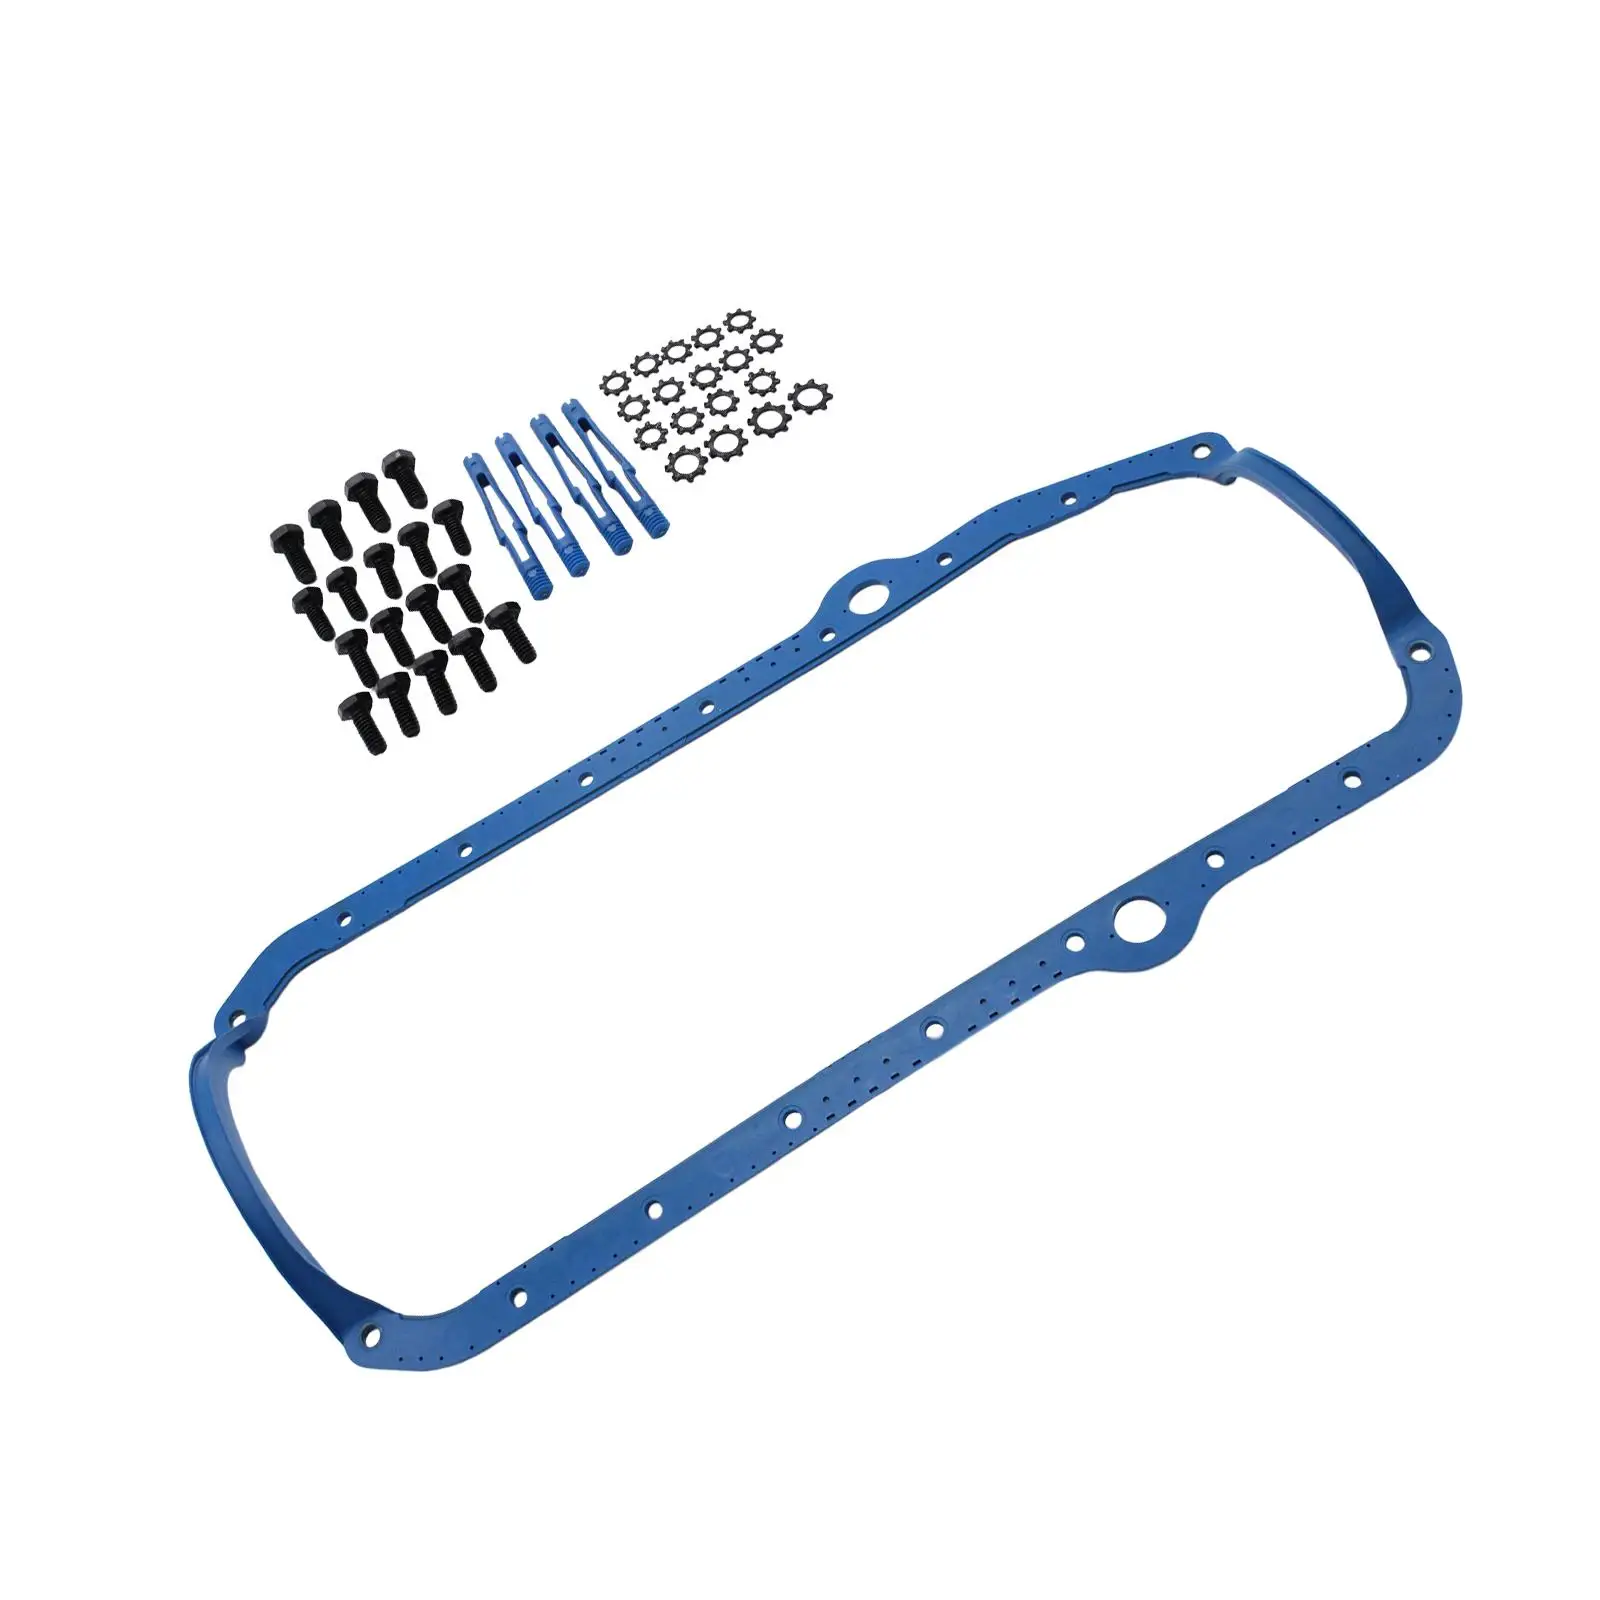 OS34510T Engine Gasket Accessory Premium Replaces Durable Oil Pan Gasket Set Spare Parts for Chevy Small Block 1975-1985